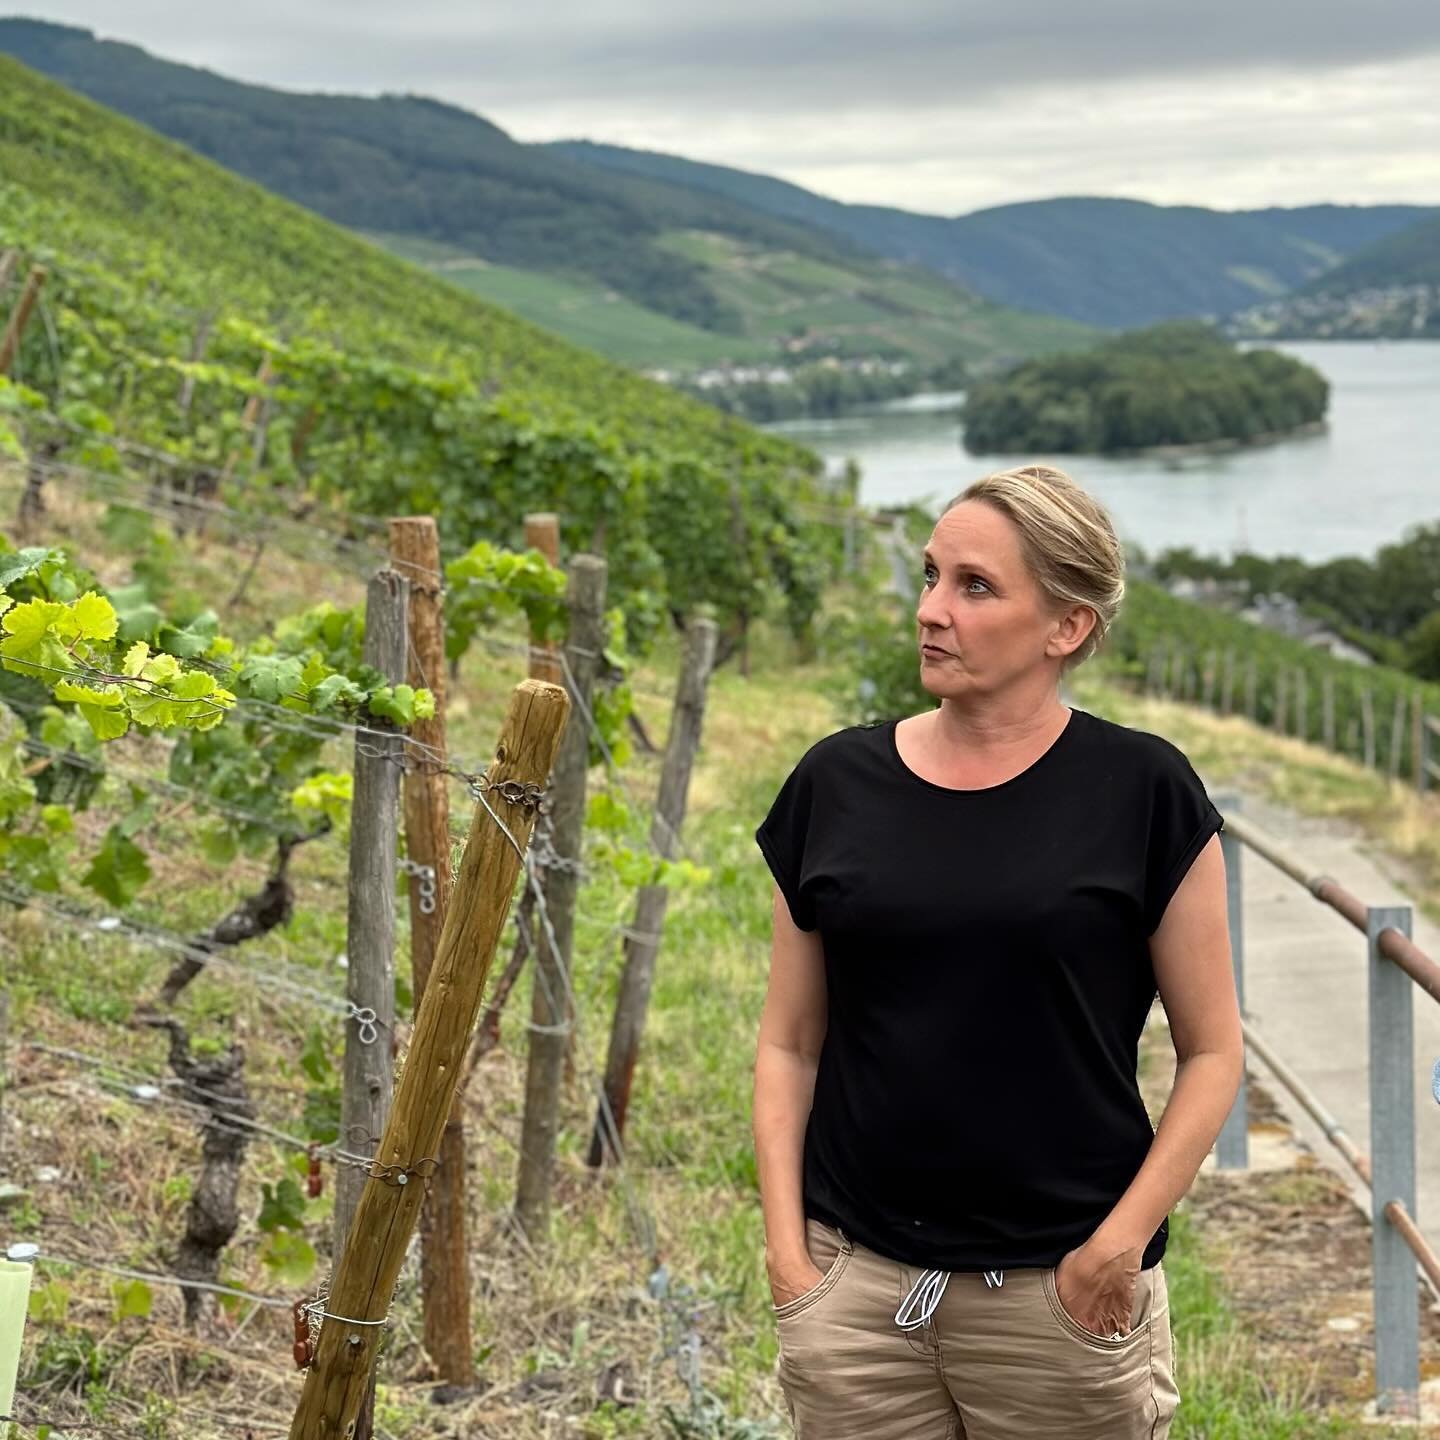 Eva Fricke, in Eltville along the Rhein river, has grown not only her holdings (from 0.25 hectares to 17 hectares currently) but also her winery into one of the most admired operations in the Rheingau today.  An impressive collection of laser-sharp R